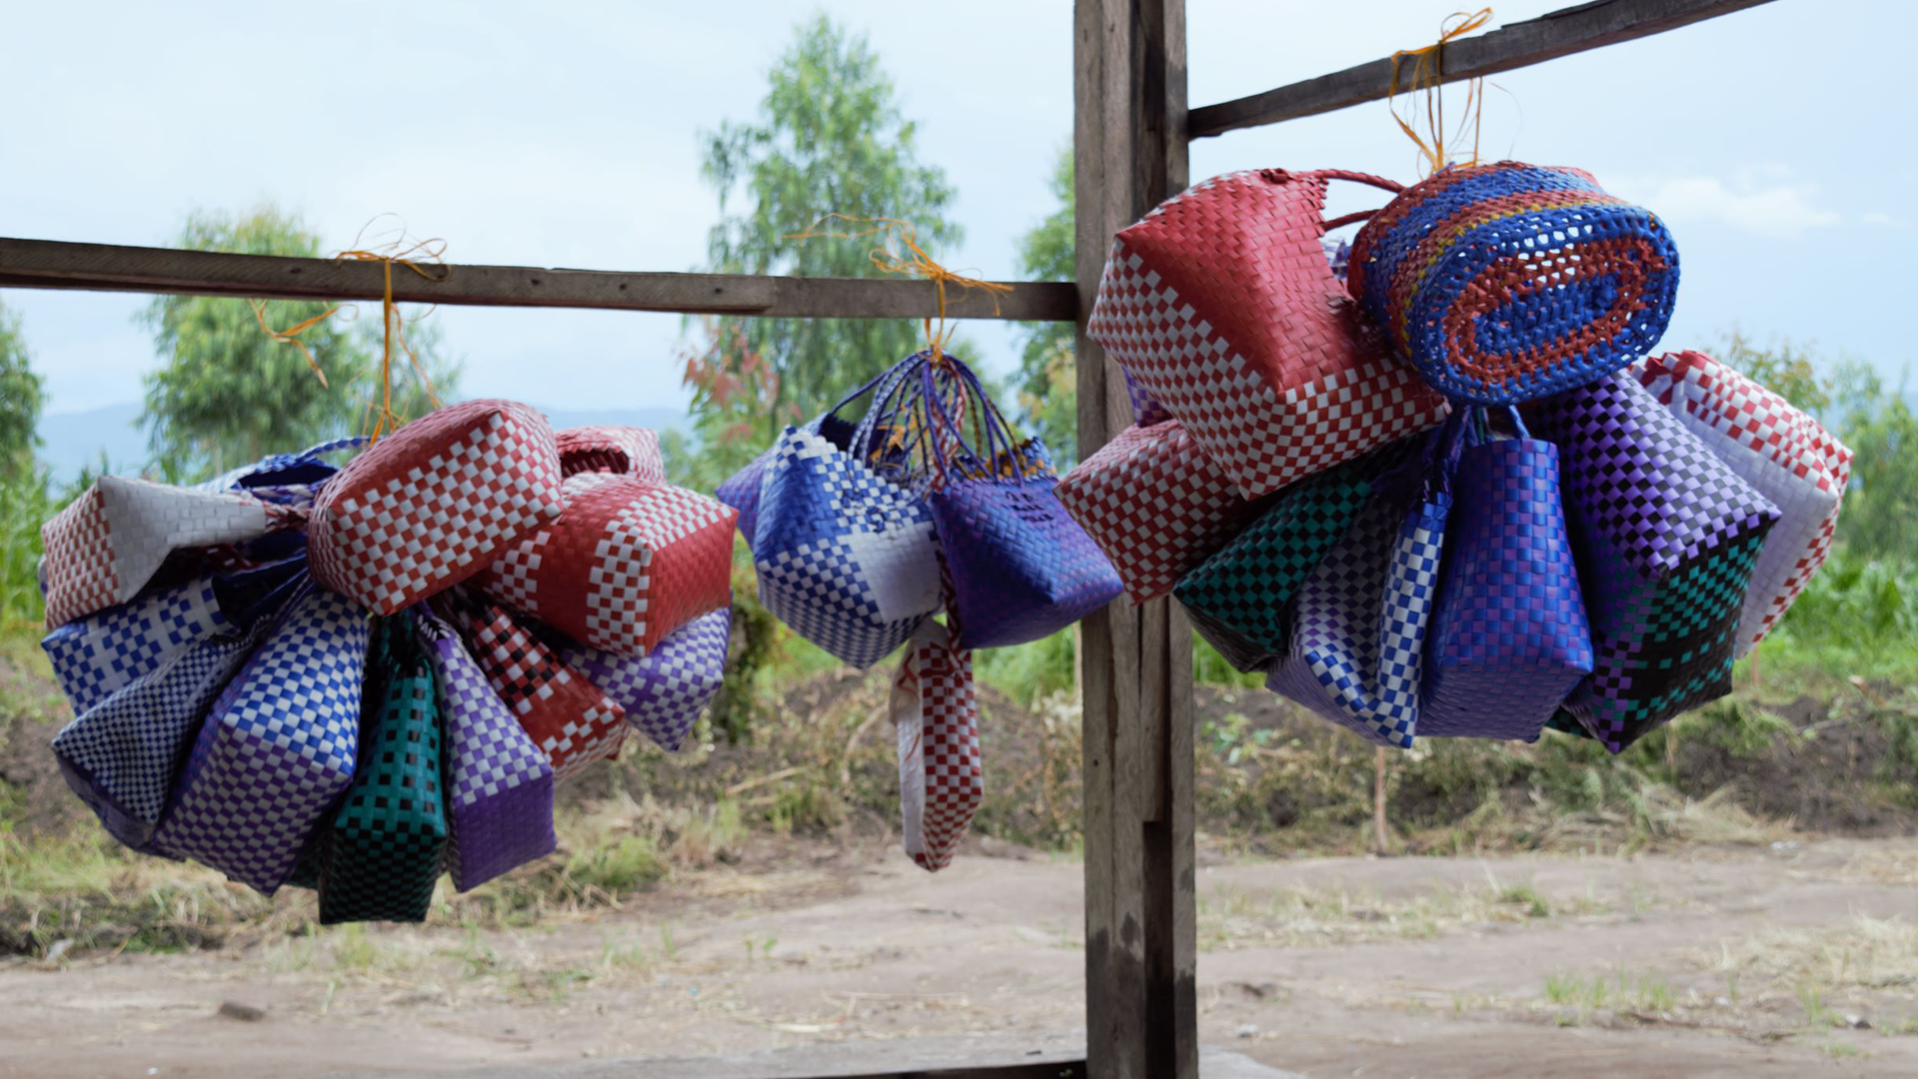 Edisa is participating in War Child's vocational programmes in DR Congo - making bags